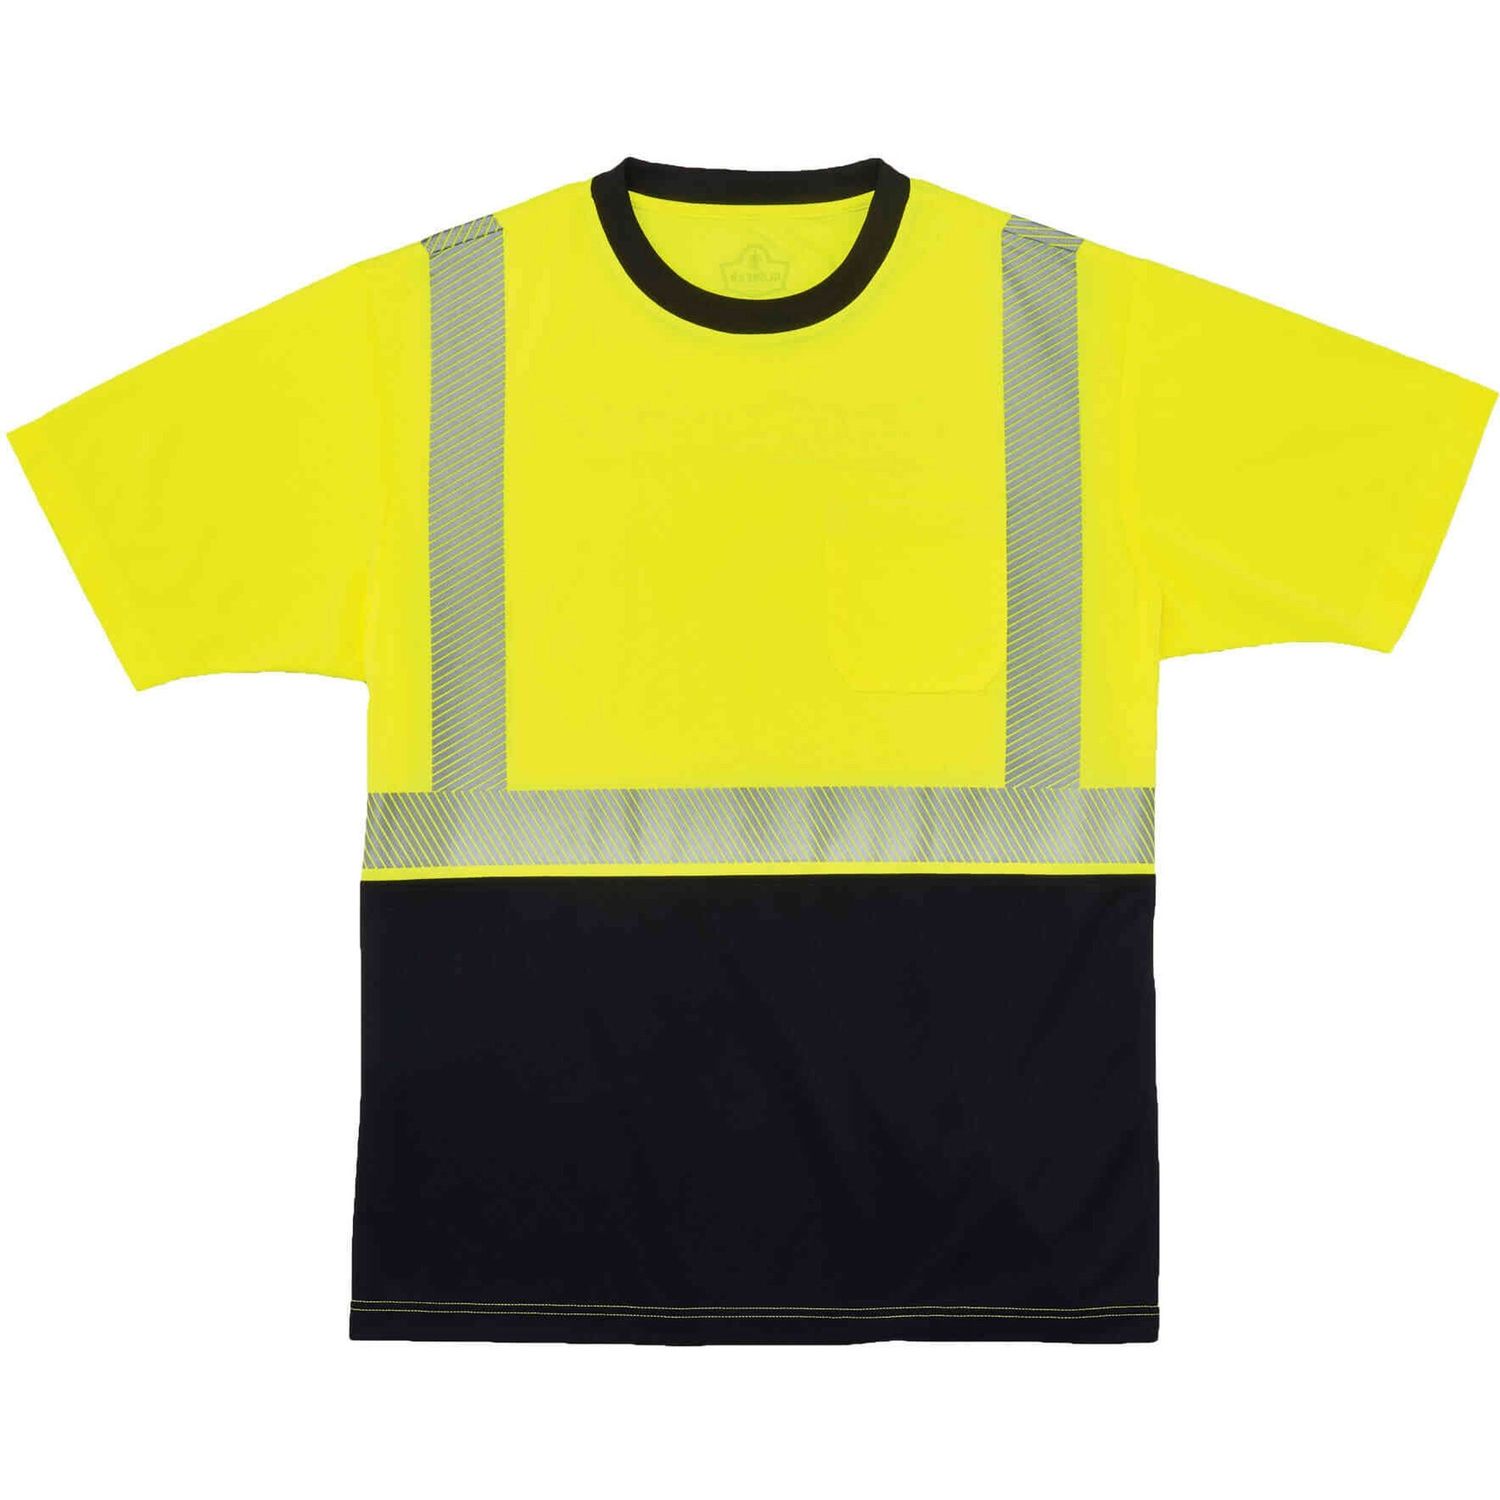 8280BK Type R Class 2 Front Performance T-Shirt Small Size, Polyester, Lime, Black